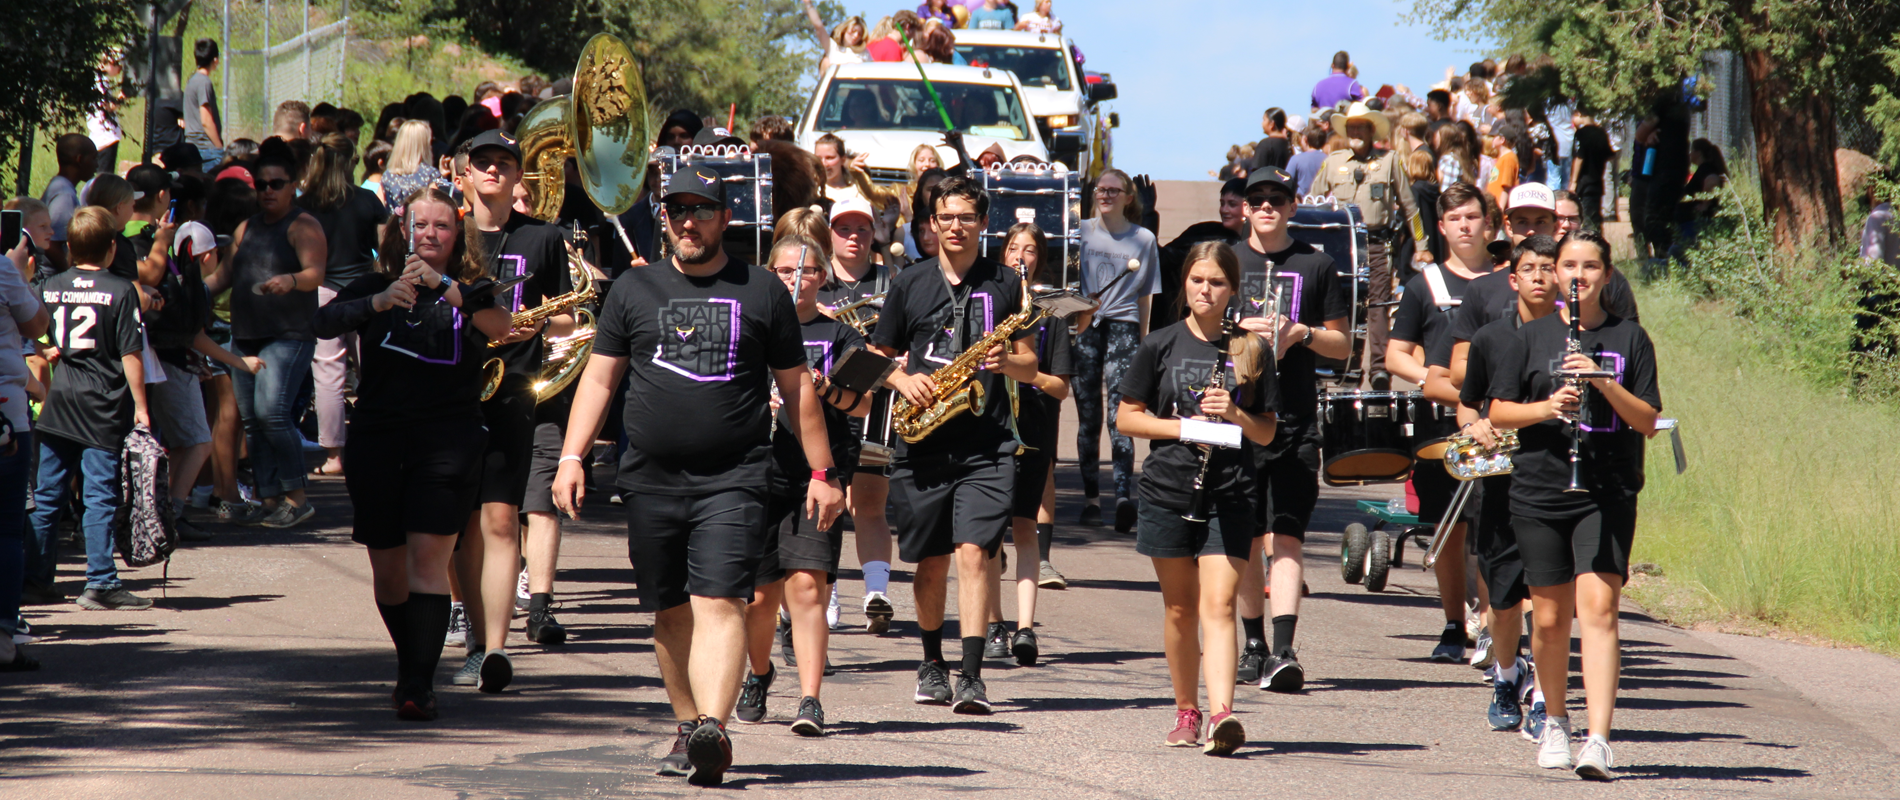 PHS band marching in the 2021 Homecoming parade